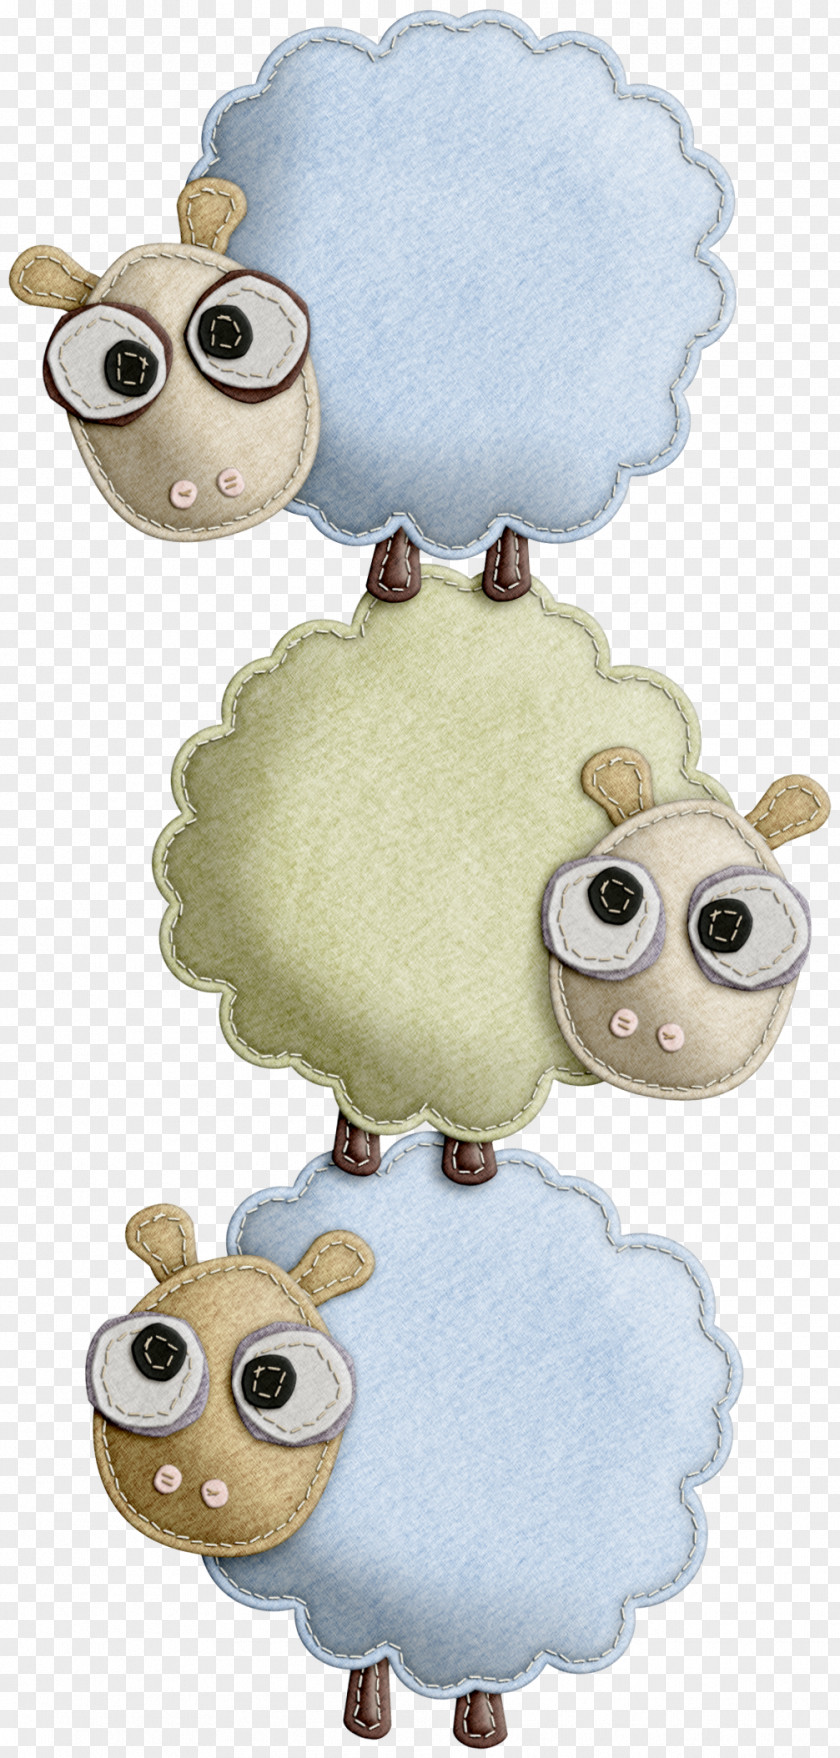 Sheep Stuffed Animals & Cuddly Toys Animated Cartoon PNG